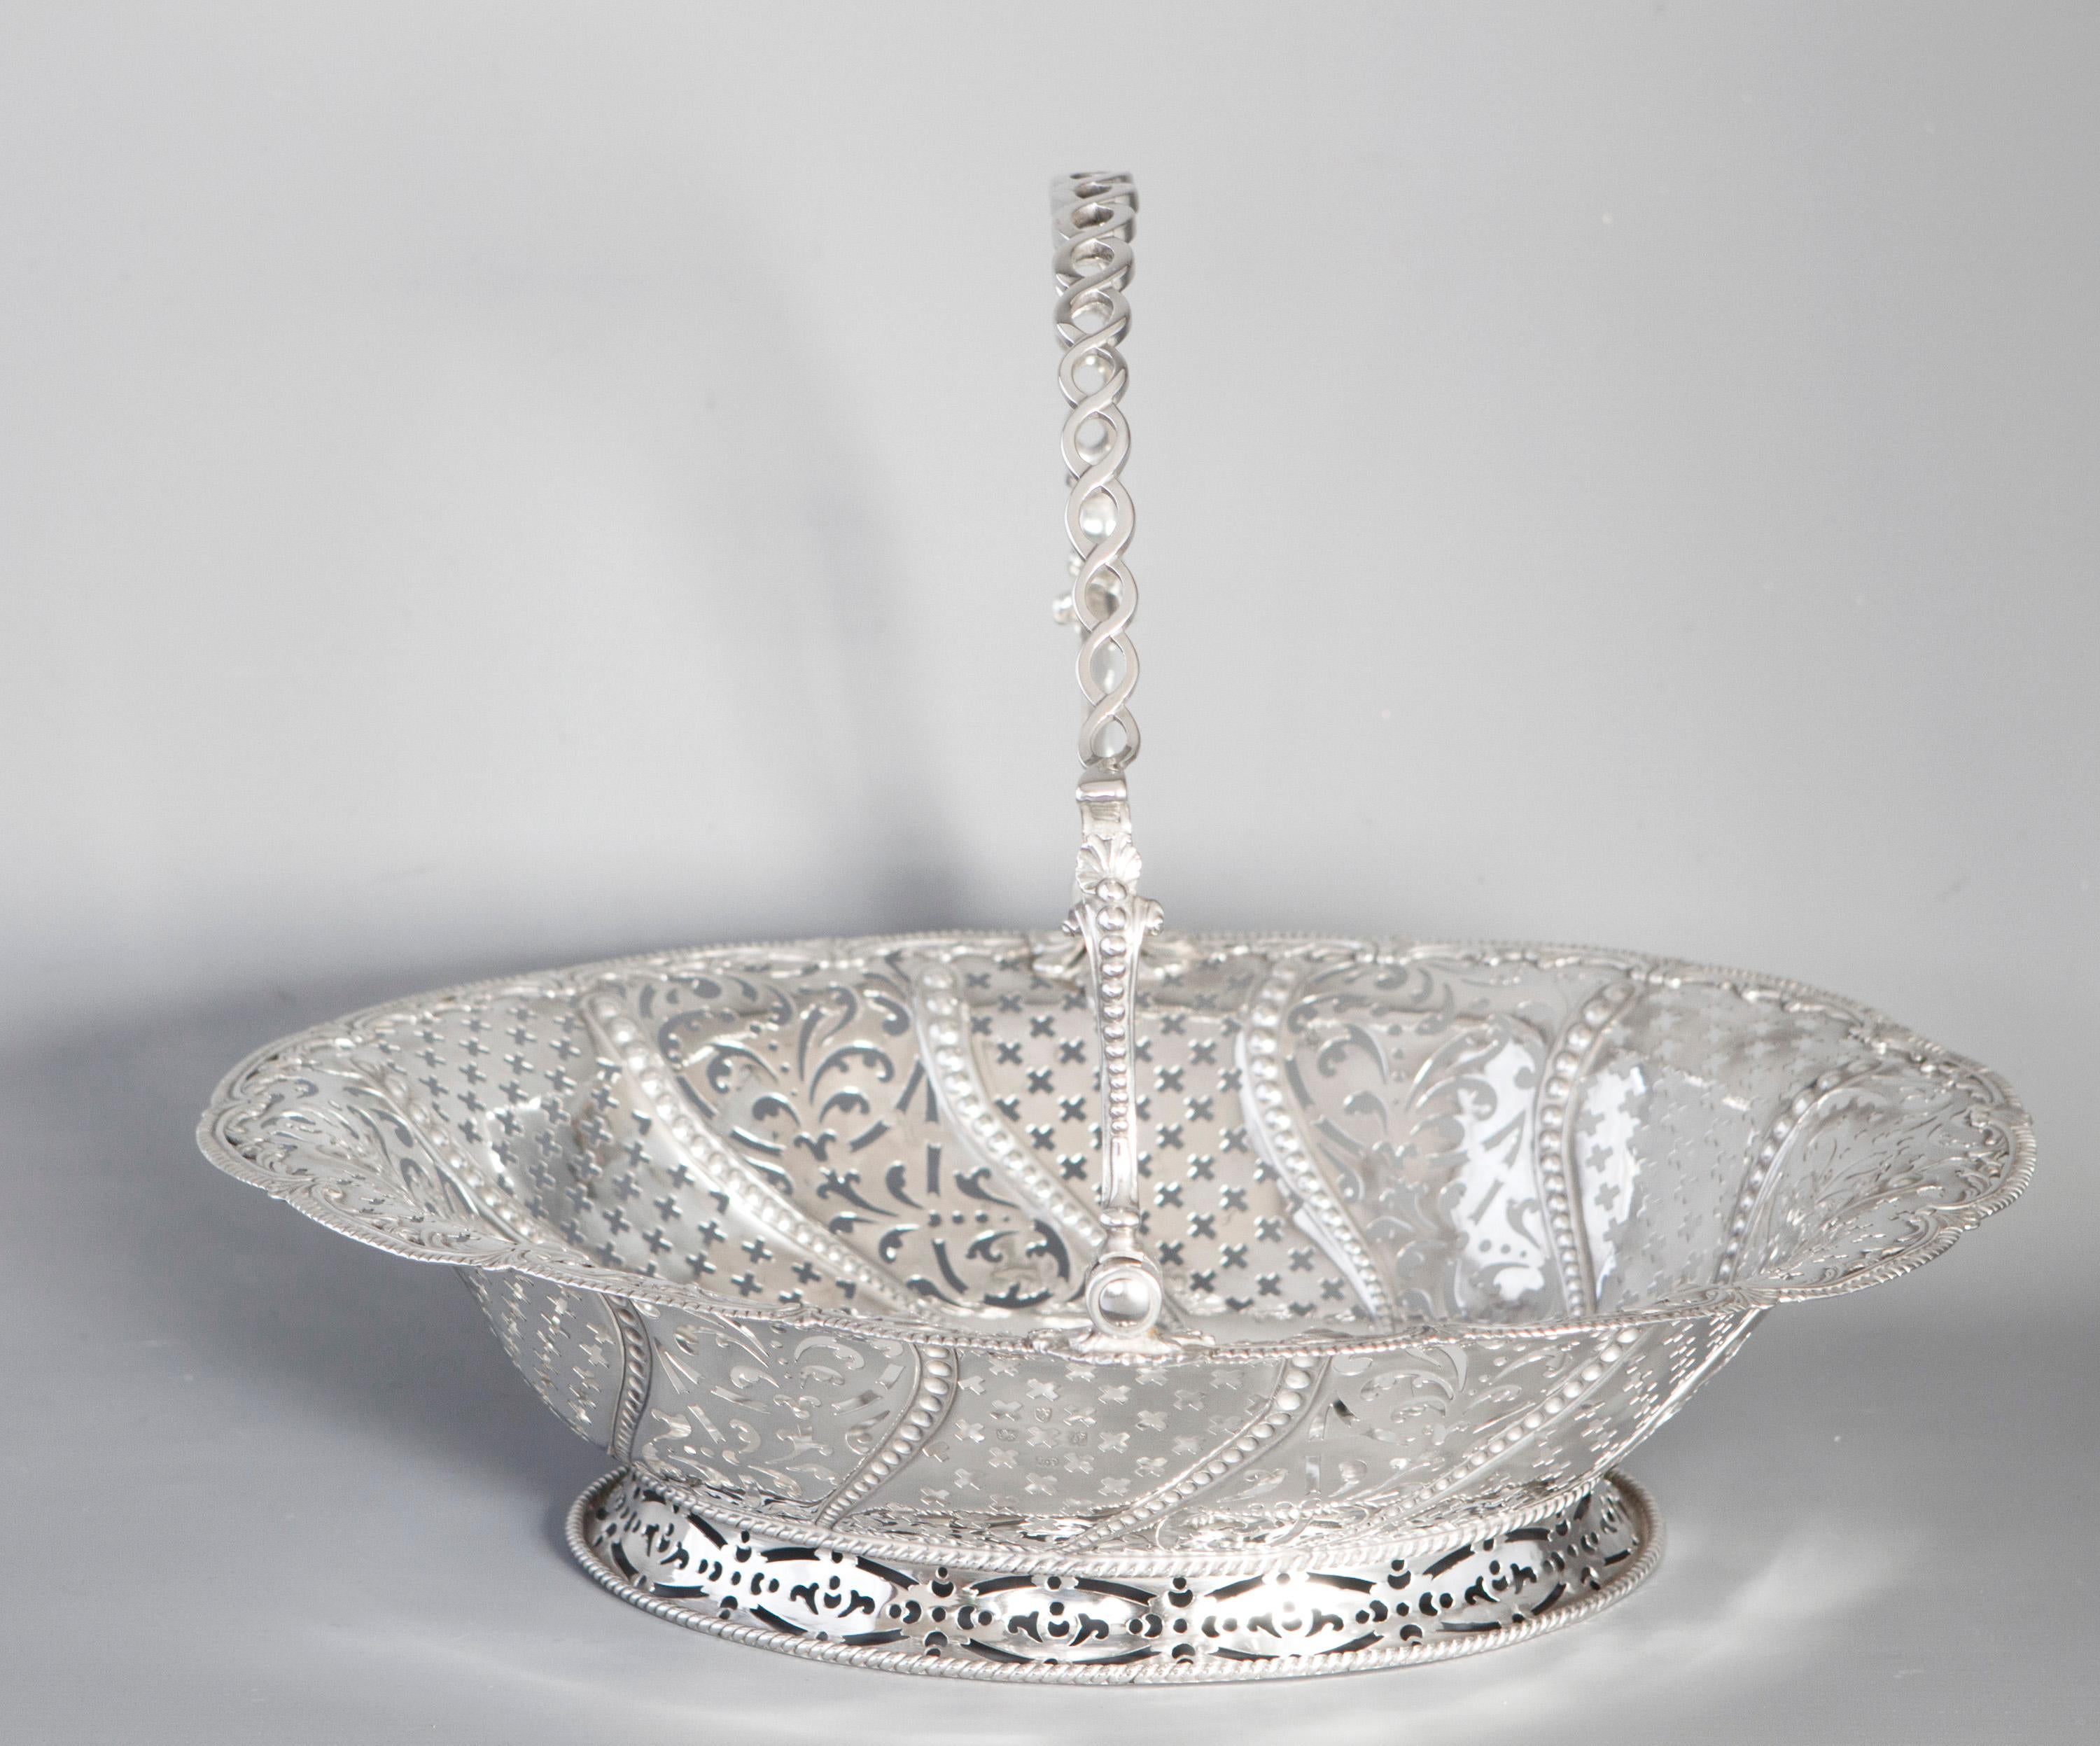 A very fine George III Silver Basket by William Plummer, London 1761. Of oval form, with pierced sides alternating in sections between cross and foliate patterns separated by tapering embossed beaded design. Shell and gadrooned boarder. Rope twist